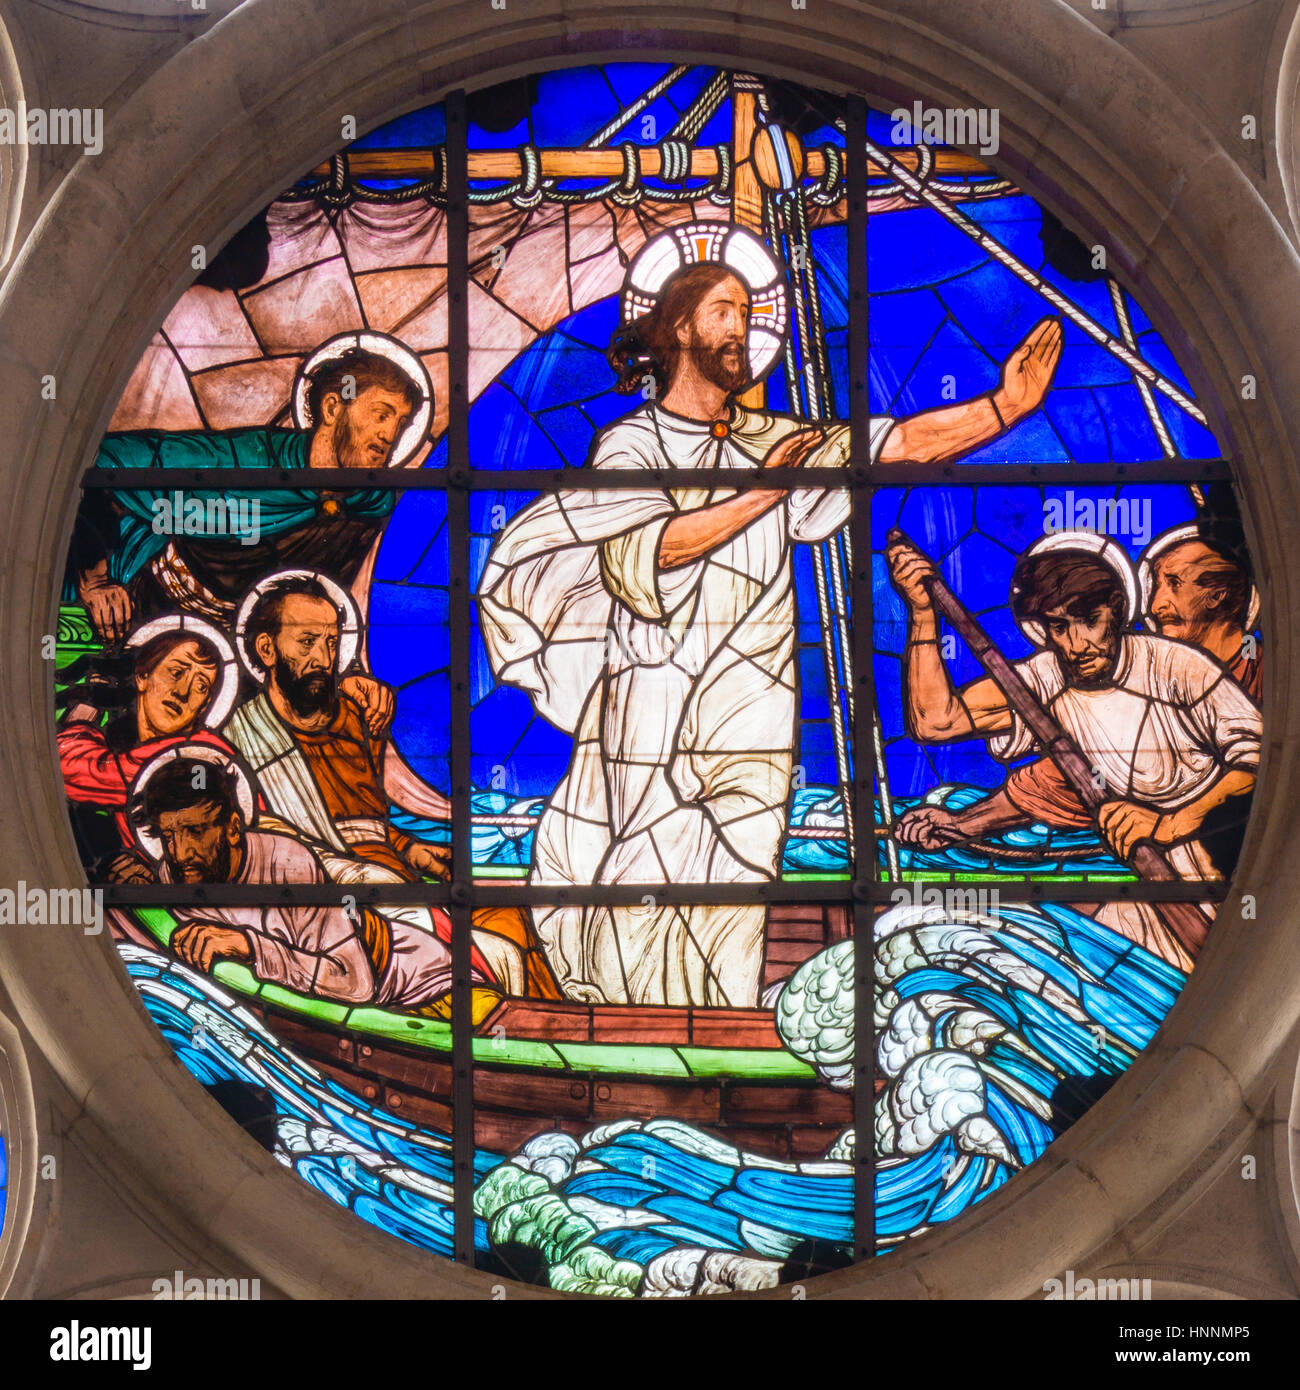 Jesus Calms the Storm, a stained glass on a window in Gustafs church, Copenhagen - February 11, 2014 Stock Photo